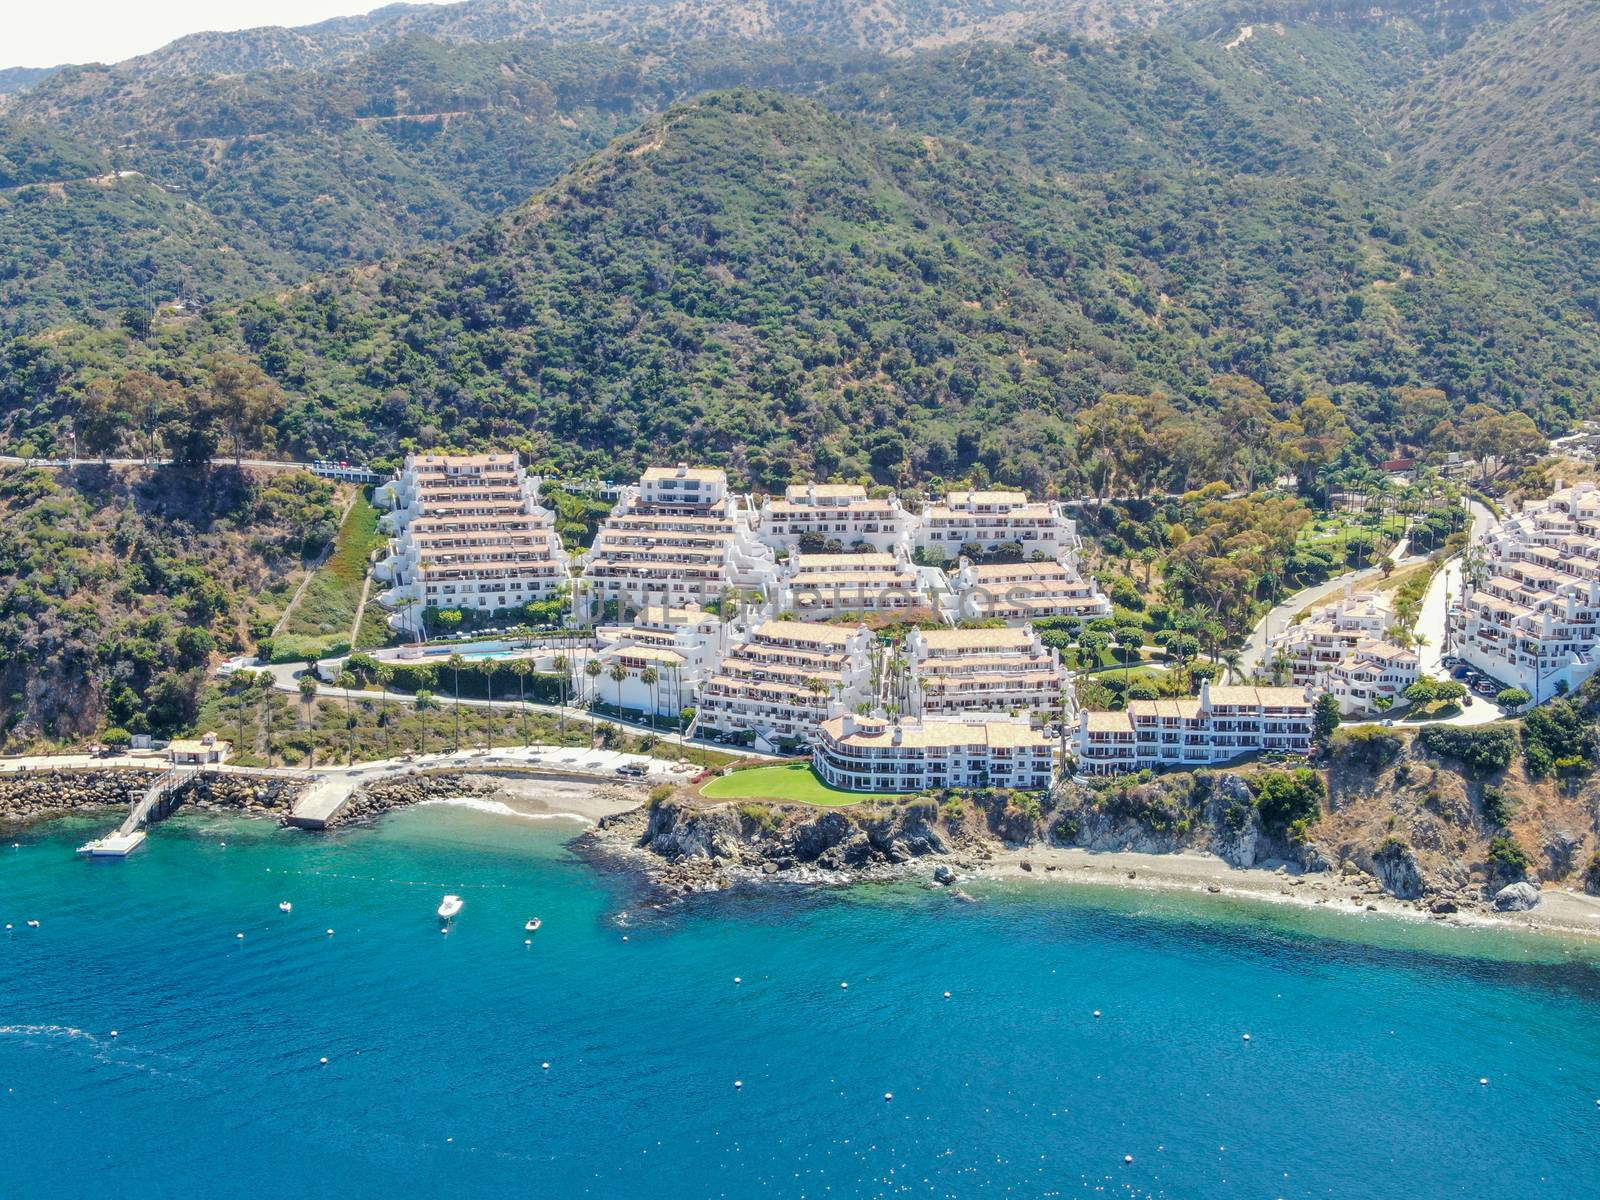 Aerial view of Hamilton Cove with apartment condo building on the cliff, Santa Catalina Island, famous tourist attraction in Southern California, USA